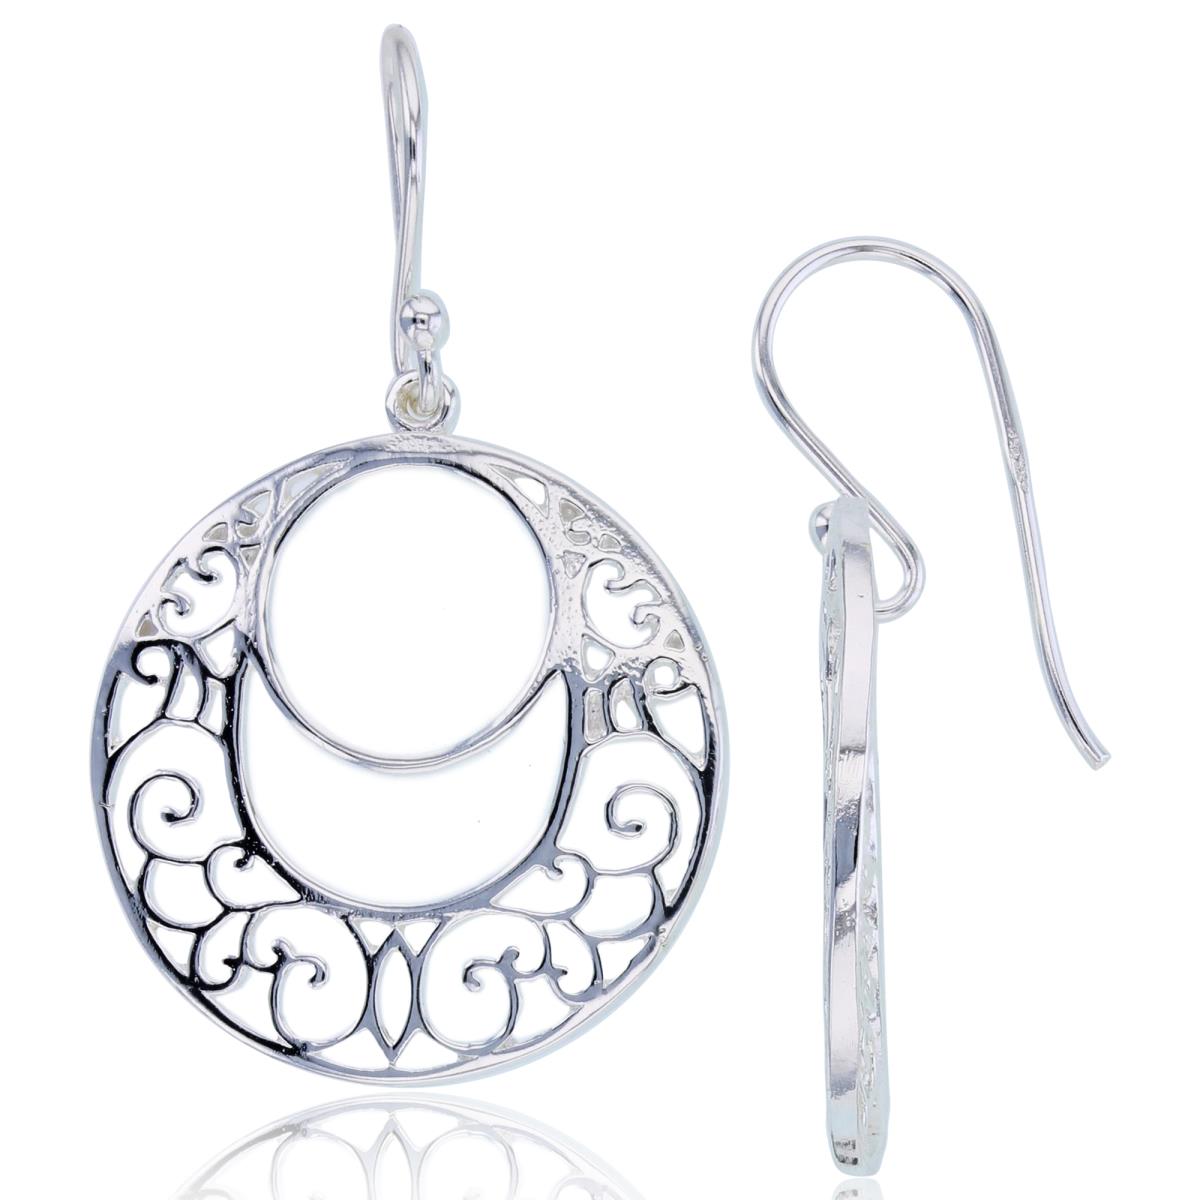 Sterling Silver Plated High Polish Open Flat Ornament Circle Dangling Earrings